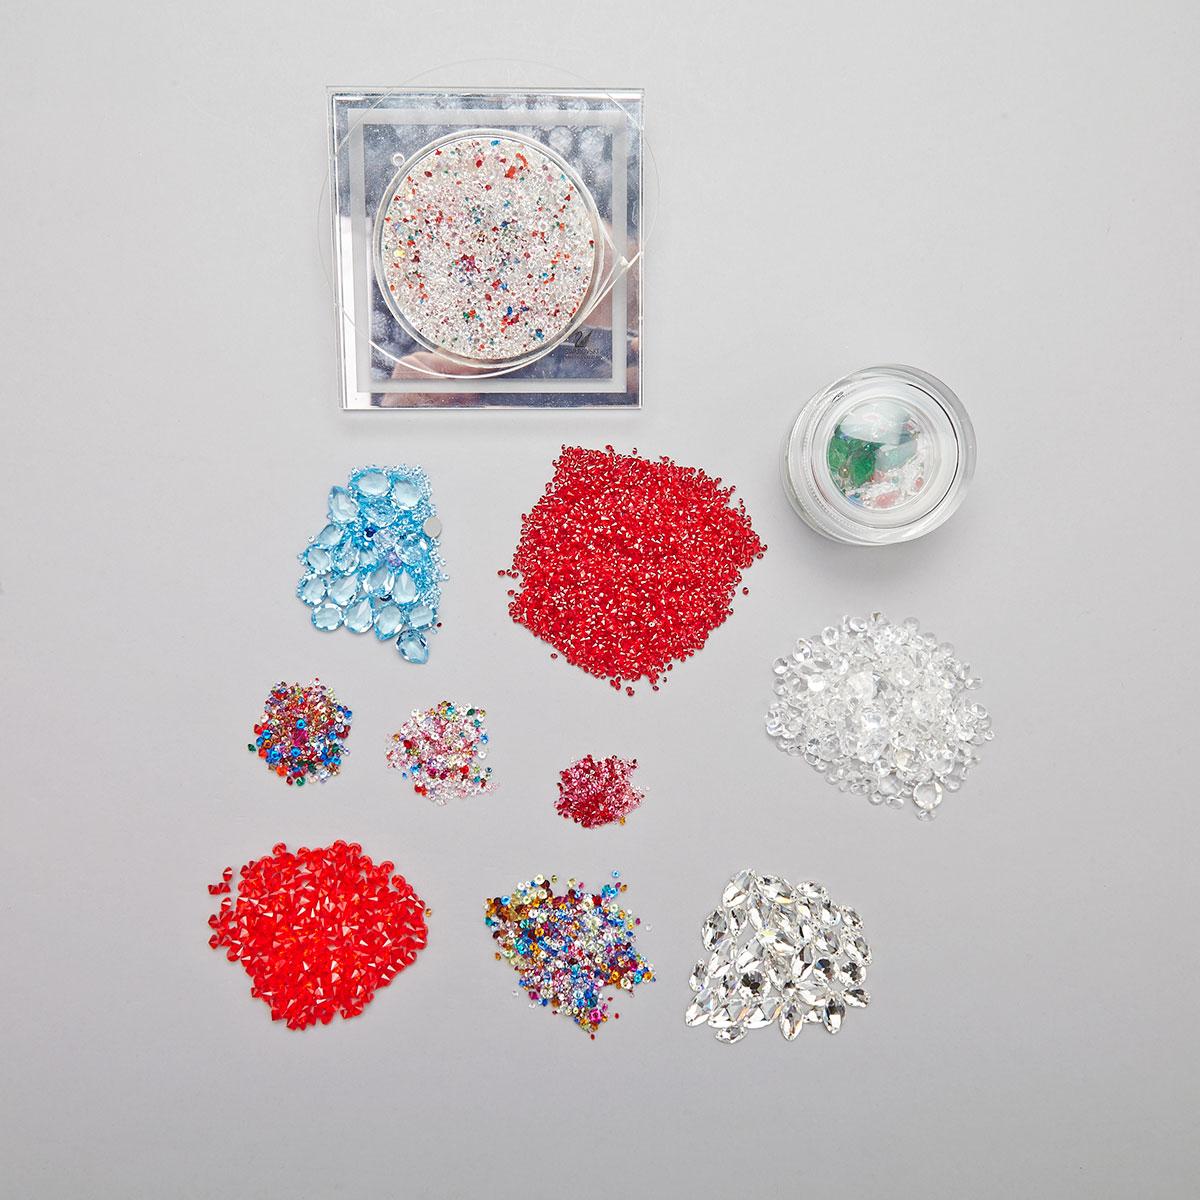 Large Quantity of Small Swarovski Crystals, early 21st century